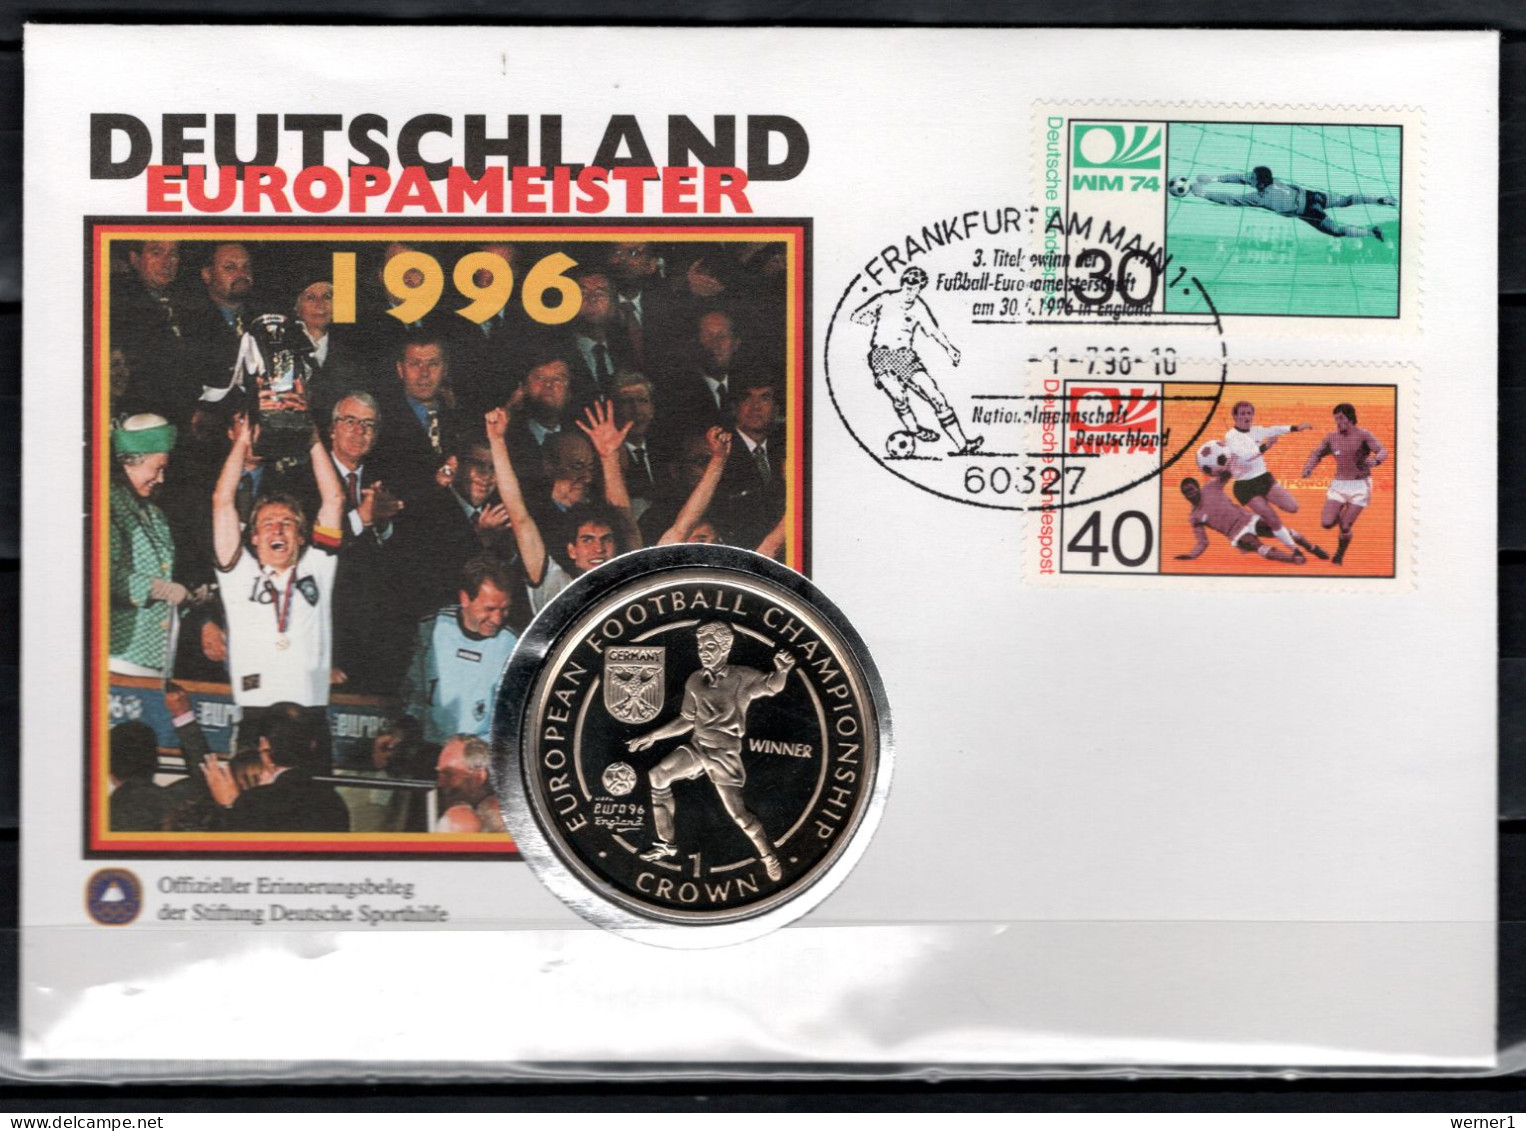 Germany 1996 Football Soccer European Championship Com. Numismatic Cover With 1 Crown Coin From Isle Of Man - Fußball-Europameisterschaft (UEFA)